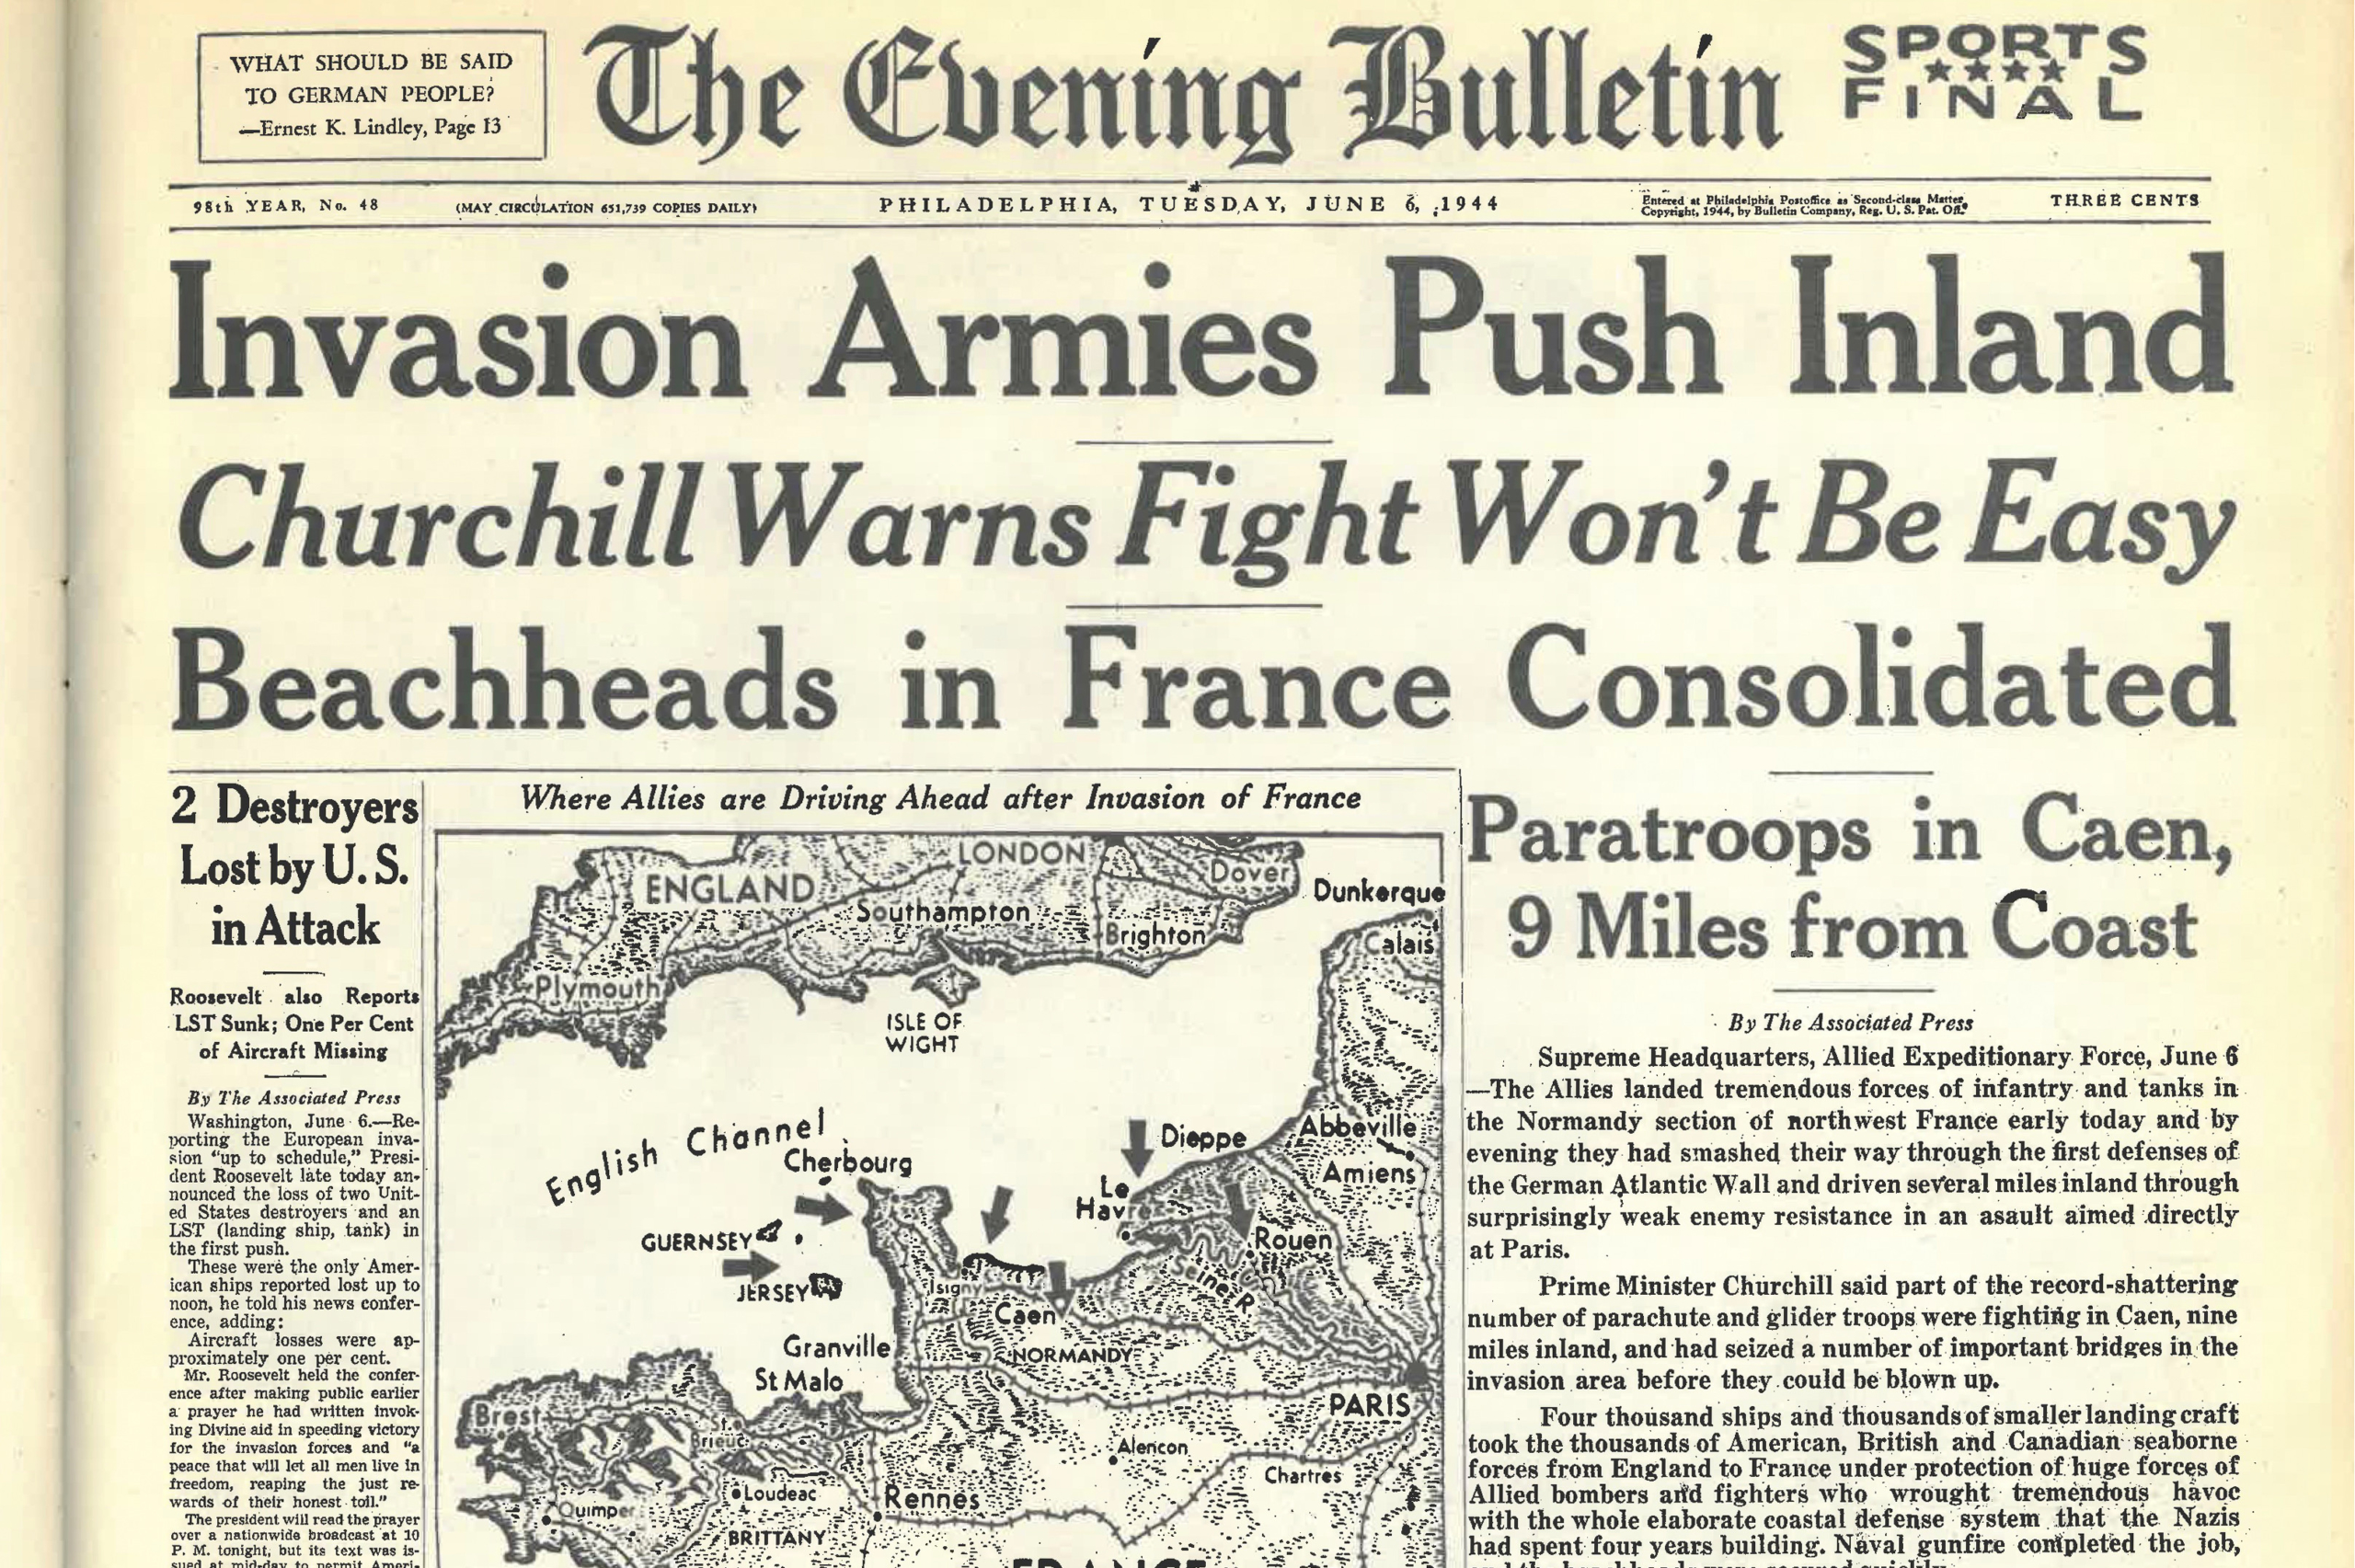 The Evening Bulletin Newspaper Covering D-Day Cover Photo